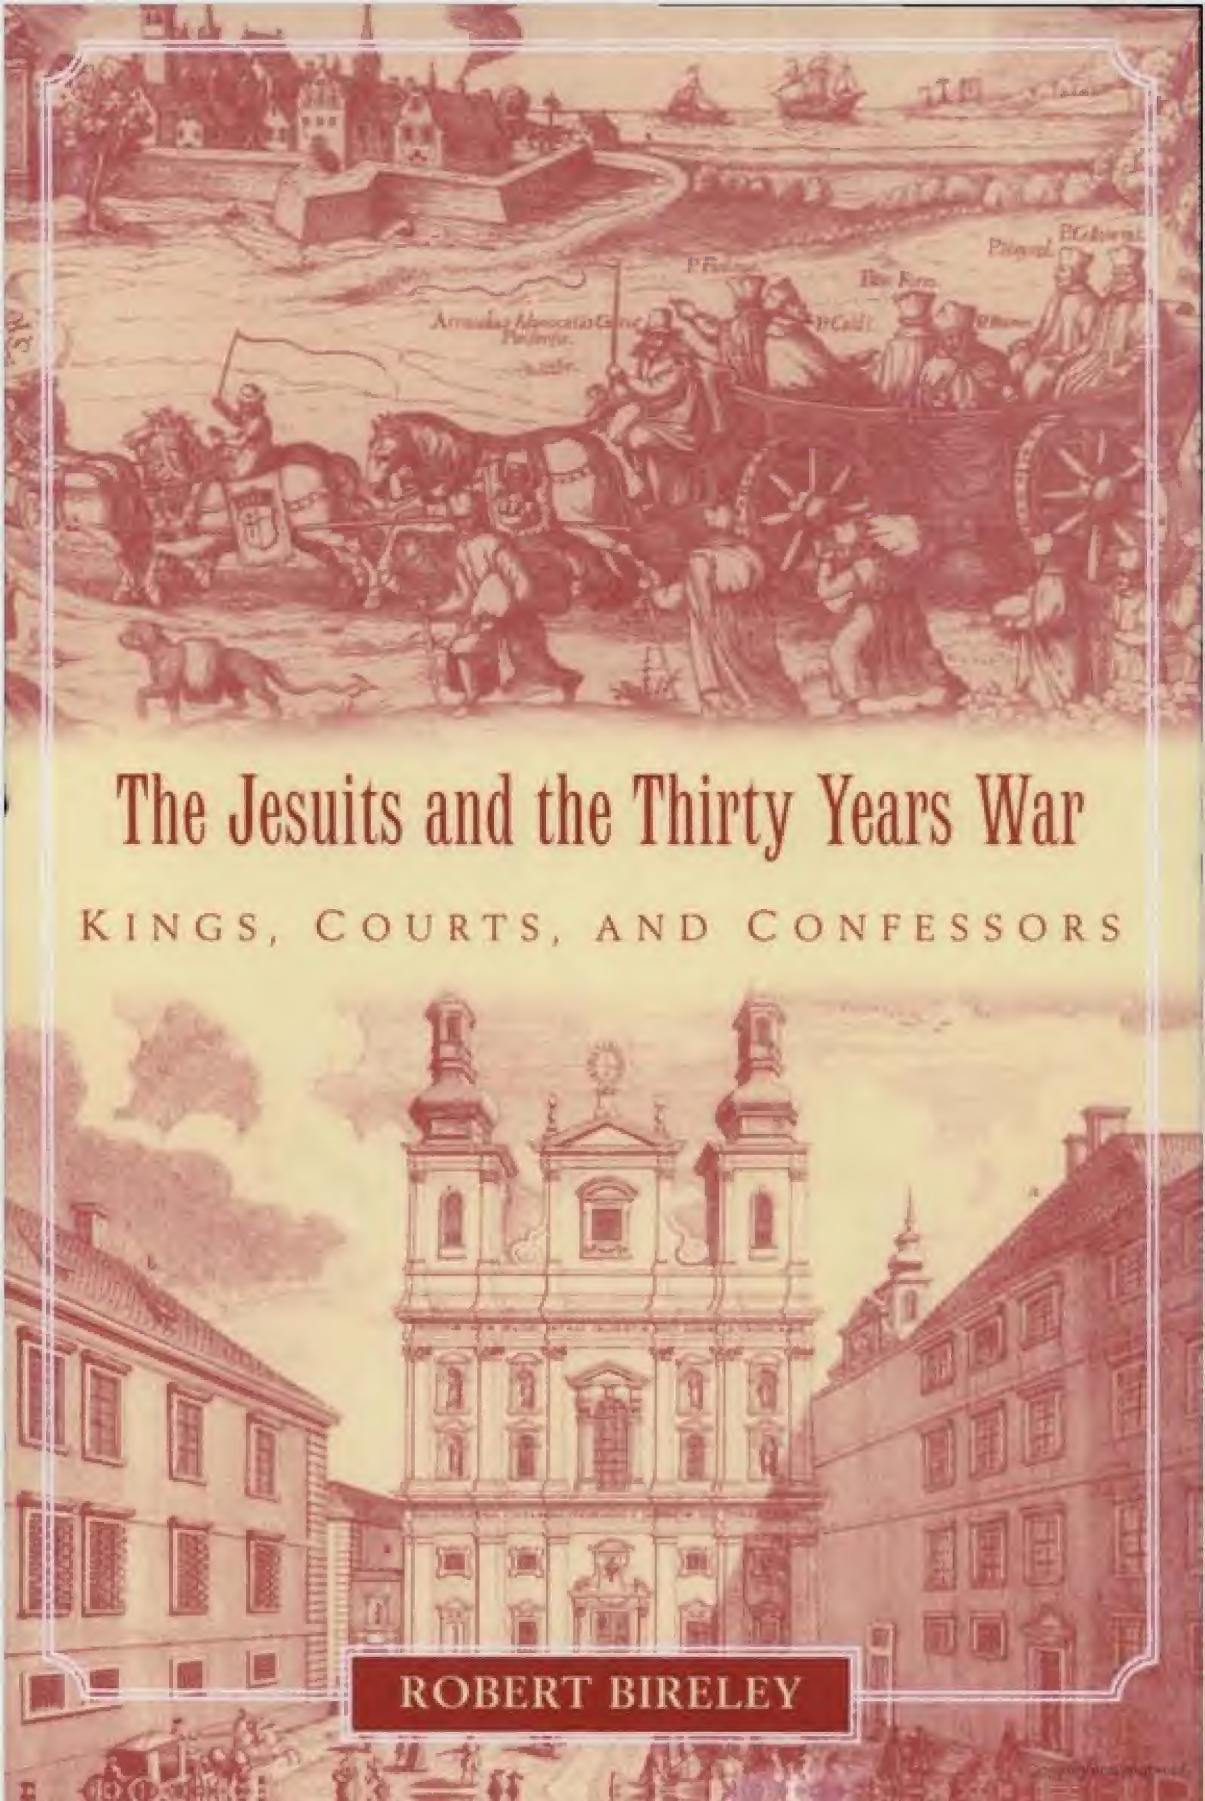 The Jesuits and the Thirty Years War: Kings, Courts, and Confessors